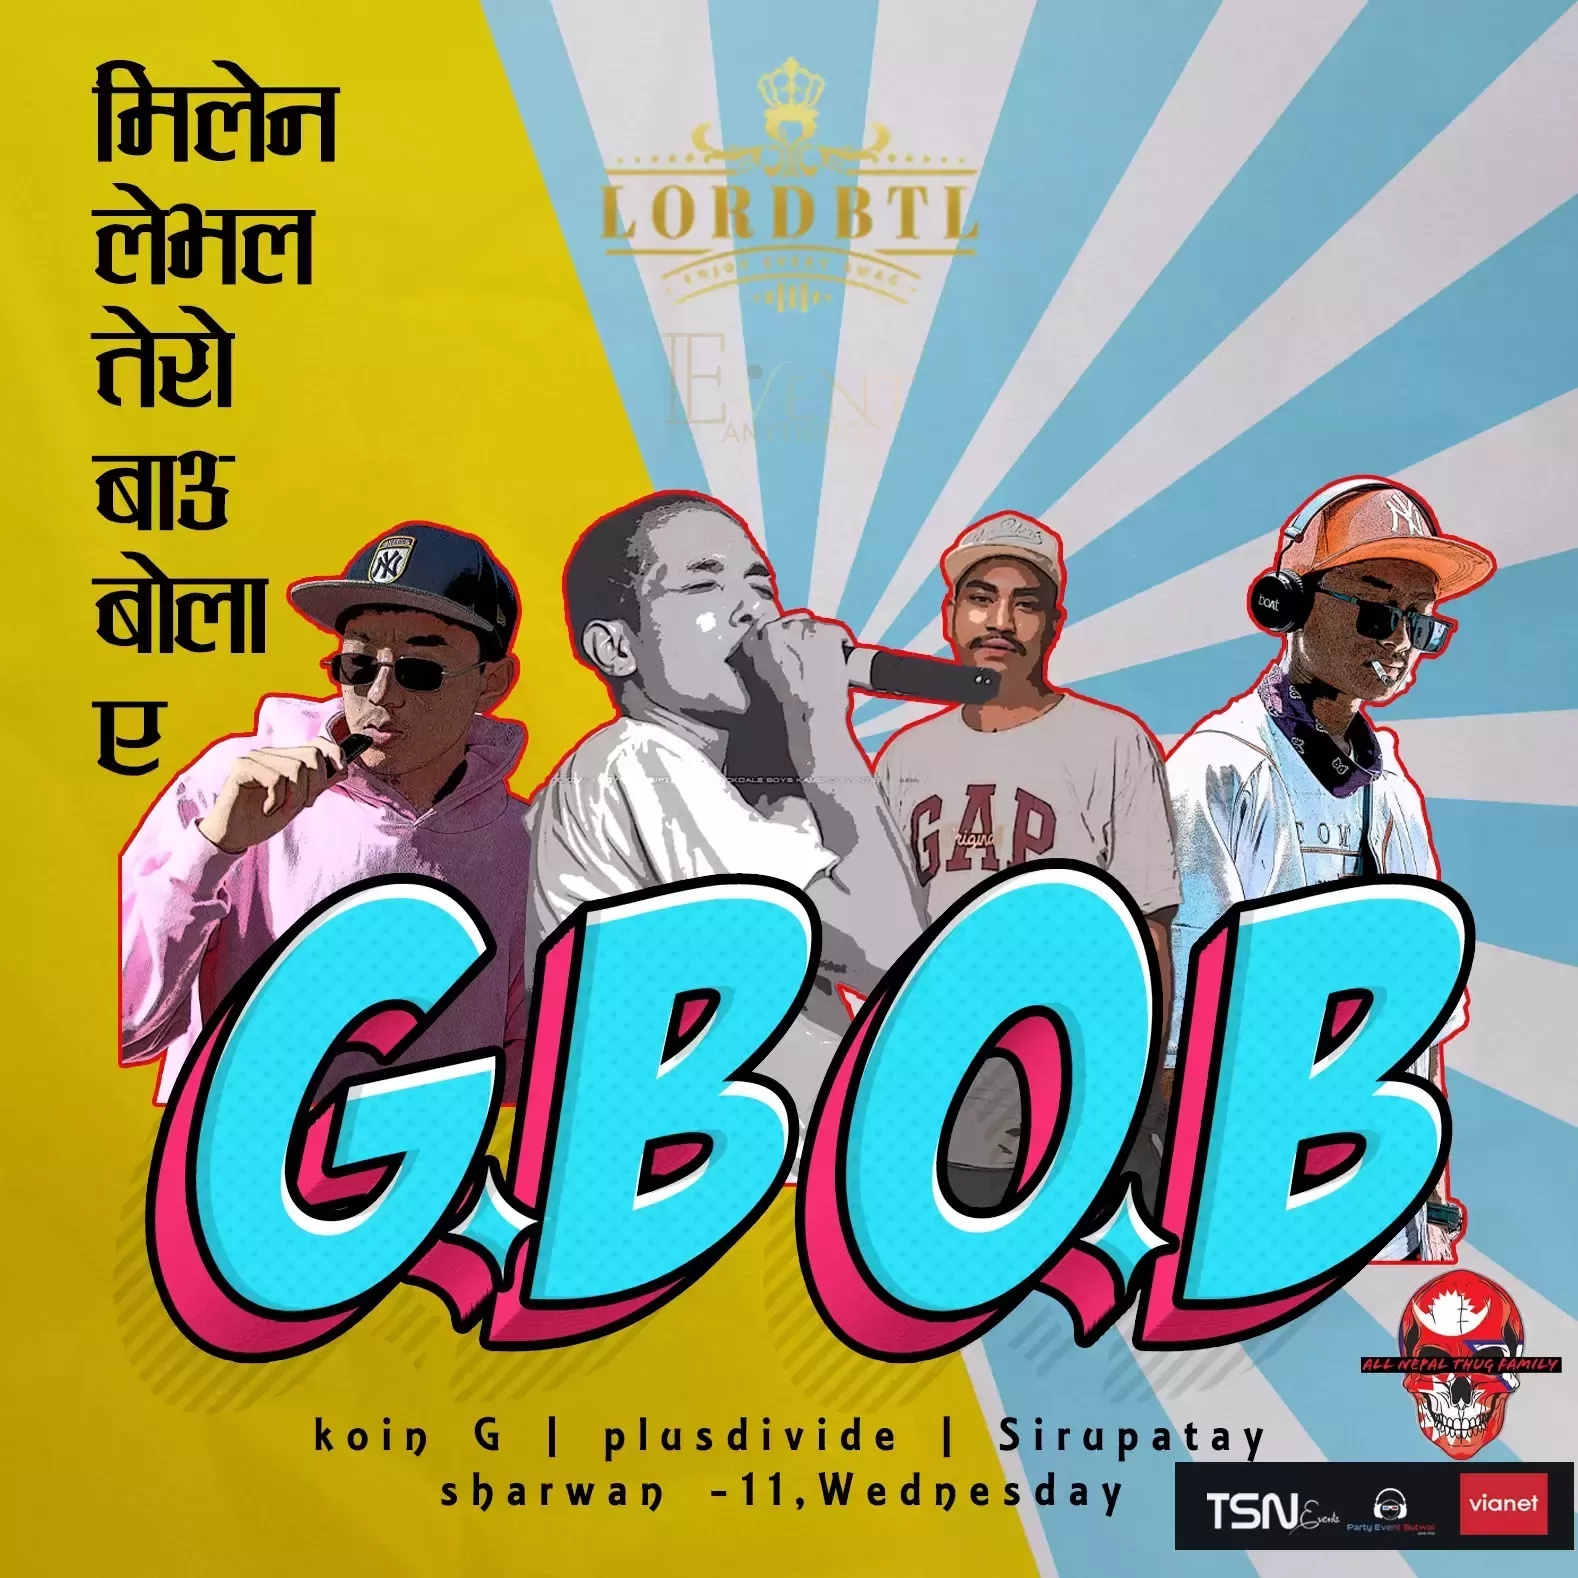 GBOB Live in Lord Butwal with Sirupatey, Koin G, PlusDivide